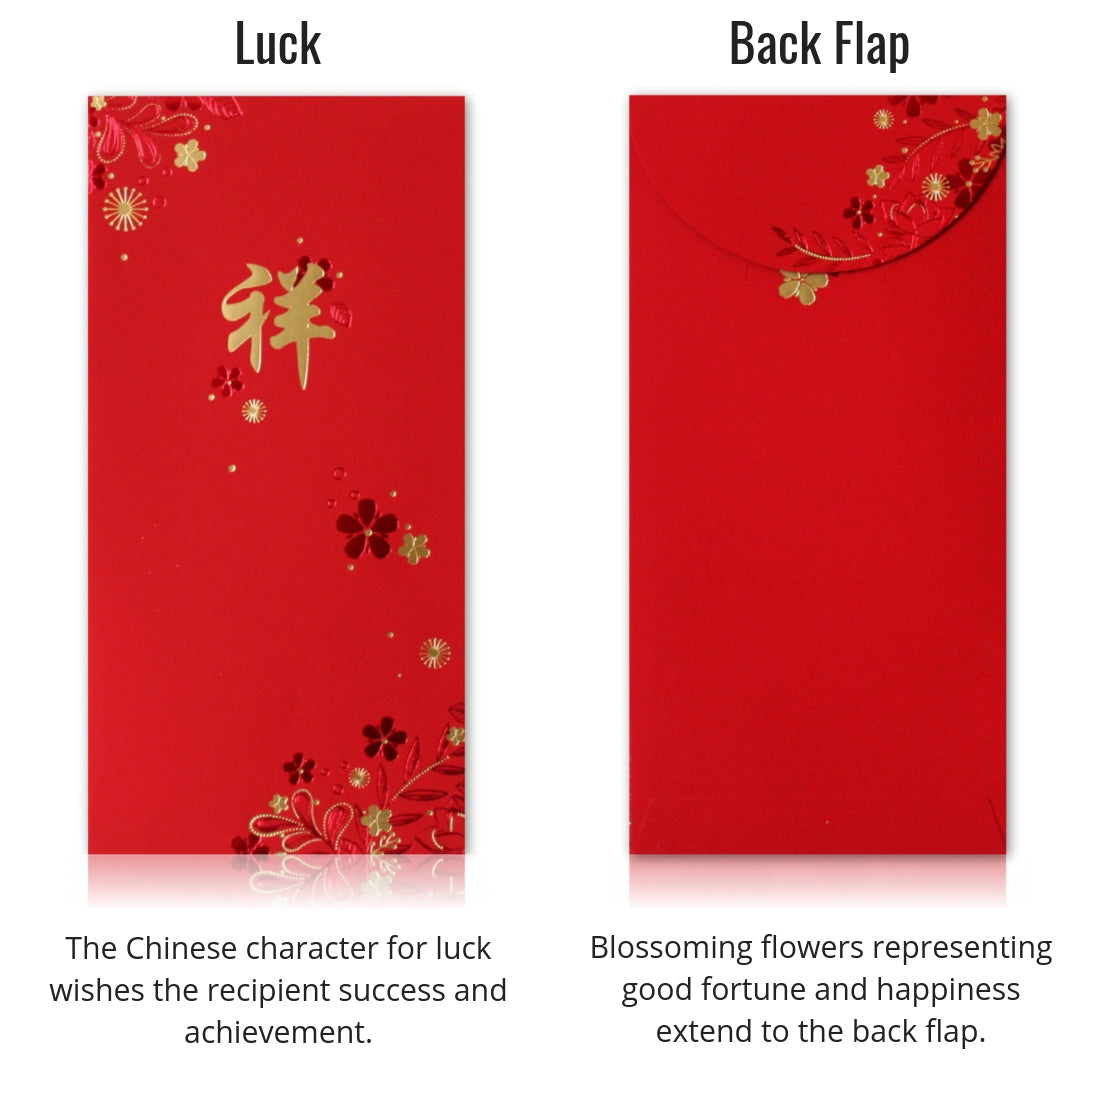 Premium Chinese Red Envelopes (Set of 9) – Chinese American Family